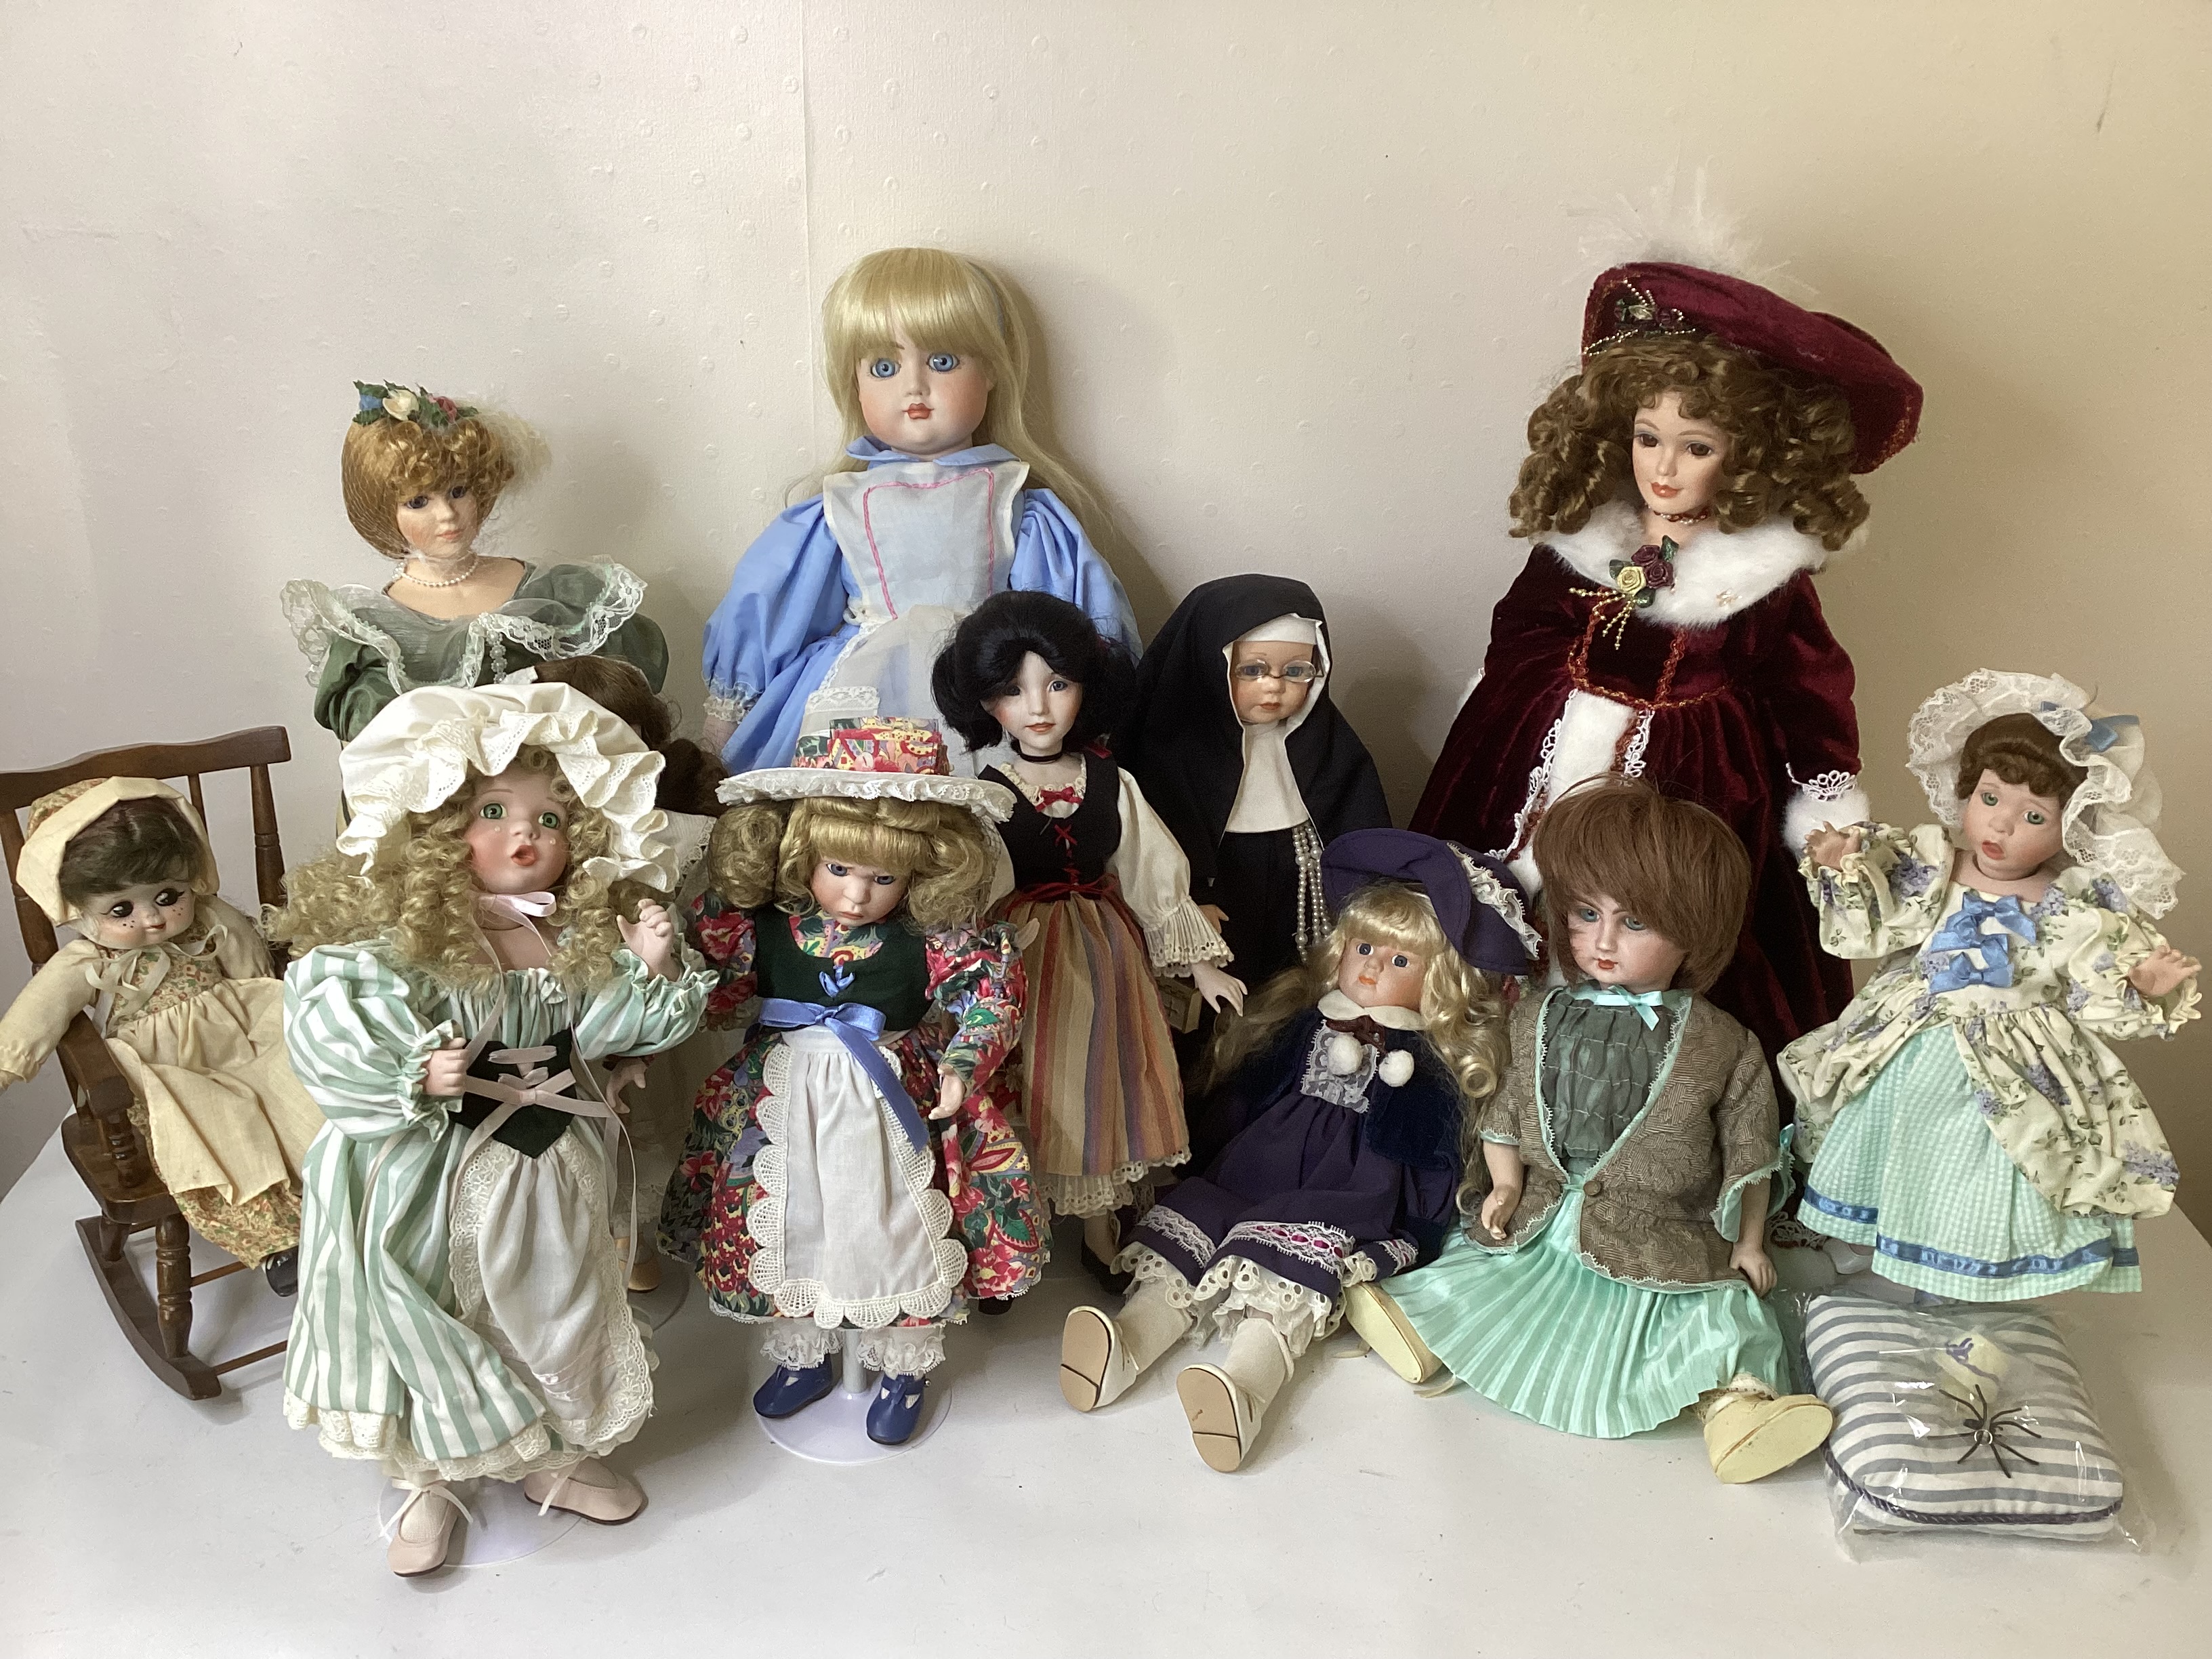 Vintage collectible artist porcelain dolls to include Alice in Wonderland, Snow White and many fairy - Image 2 of 14